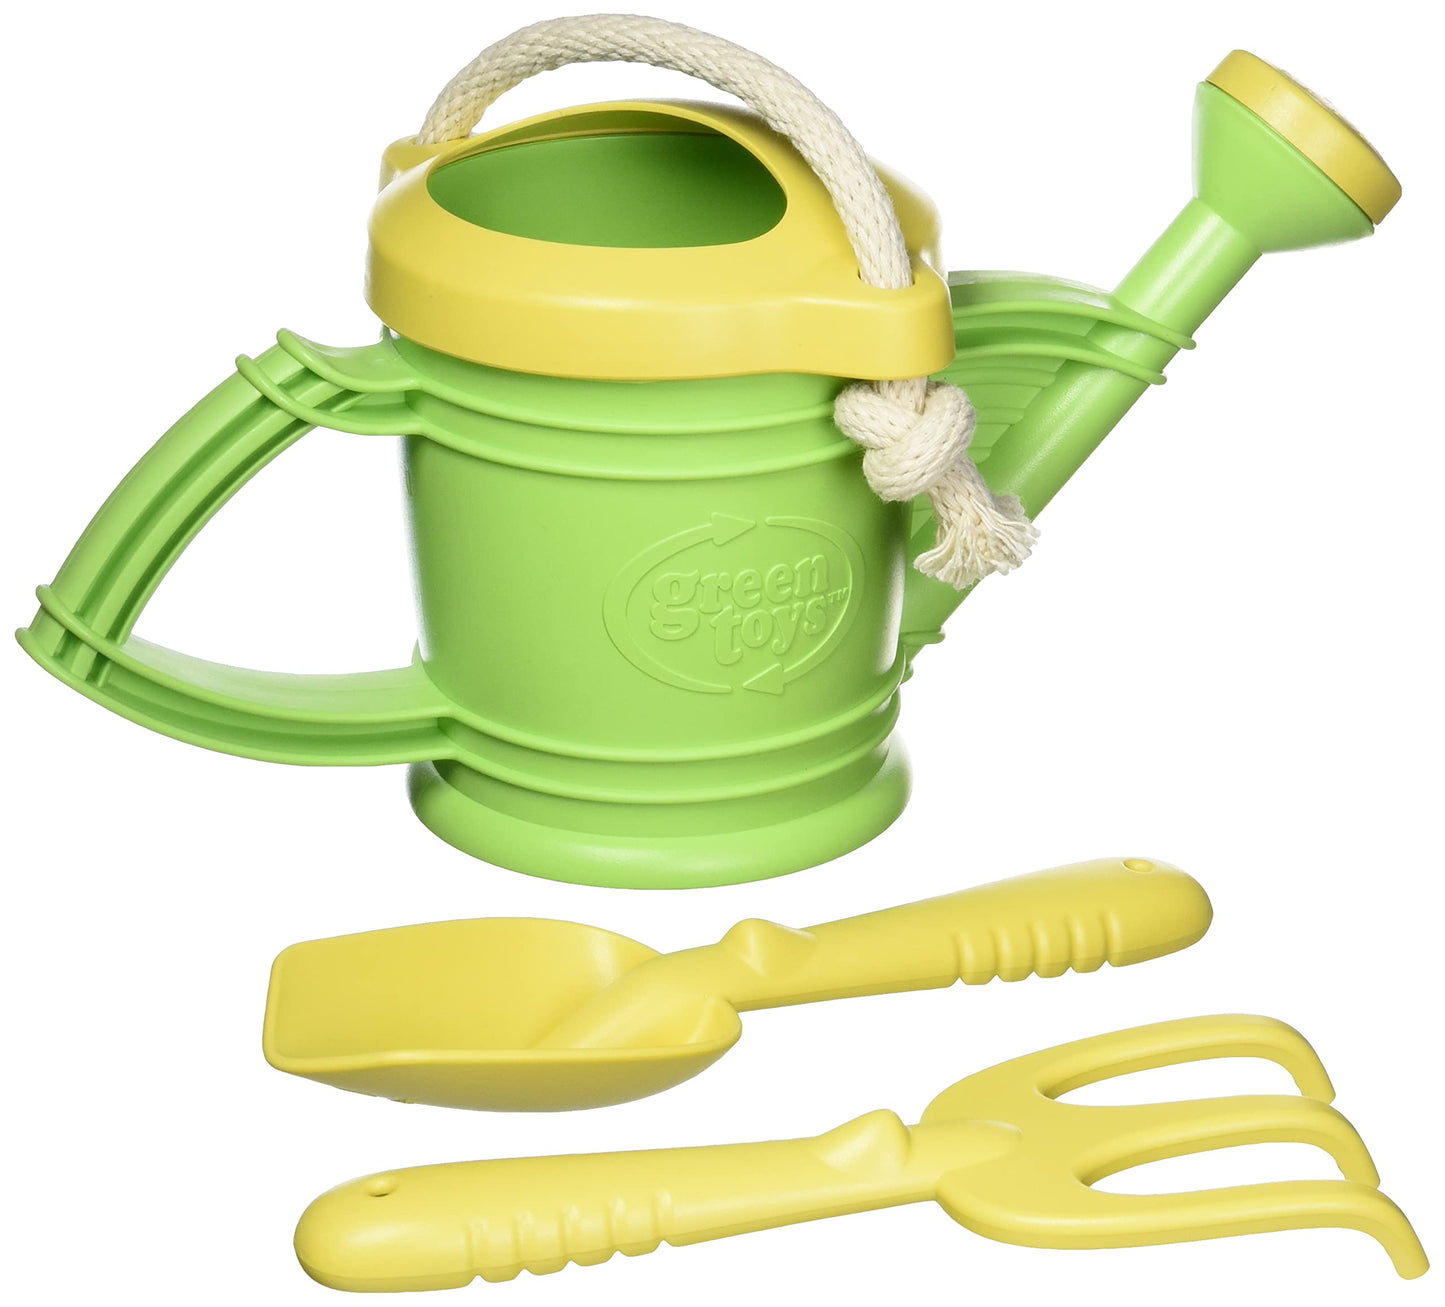 Toys Watering Can, Green 4C - Pretend Play, Motor Skills, Kids Outdoor Role Play Toy. No BPA, phthalates, PVC. Dishwasher Safe, Recycled Plastic, Made in USA, Yellow